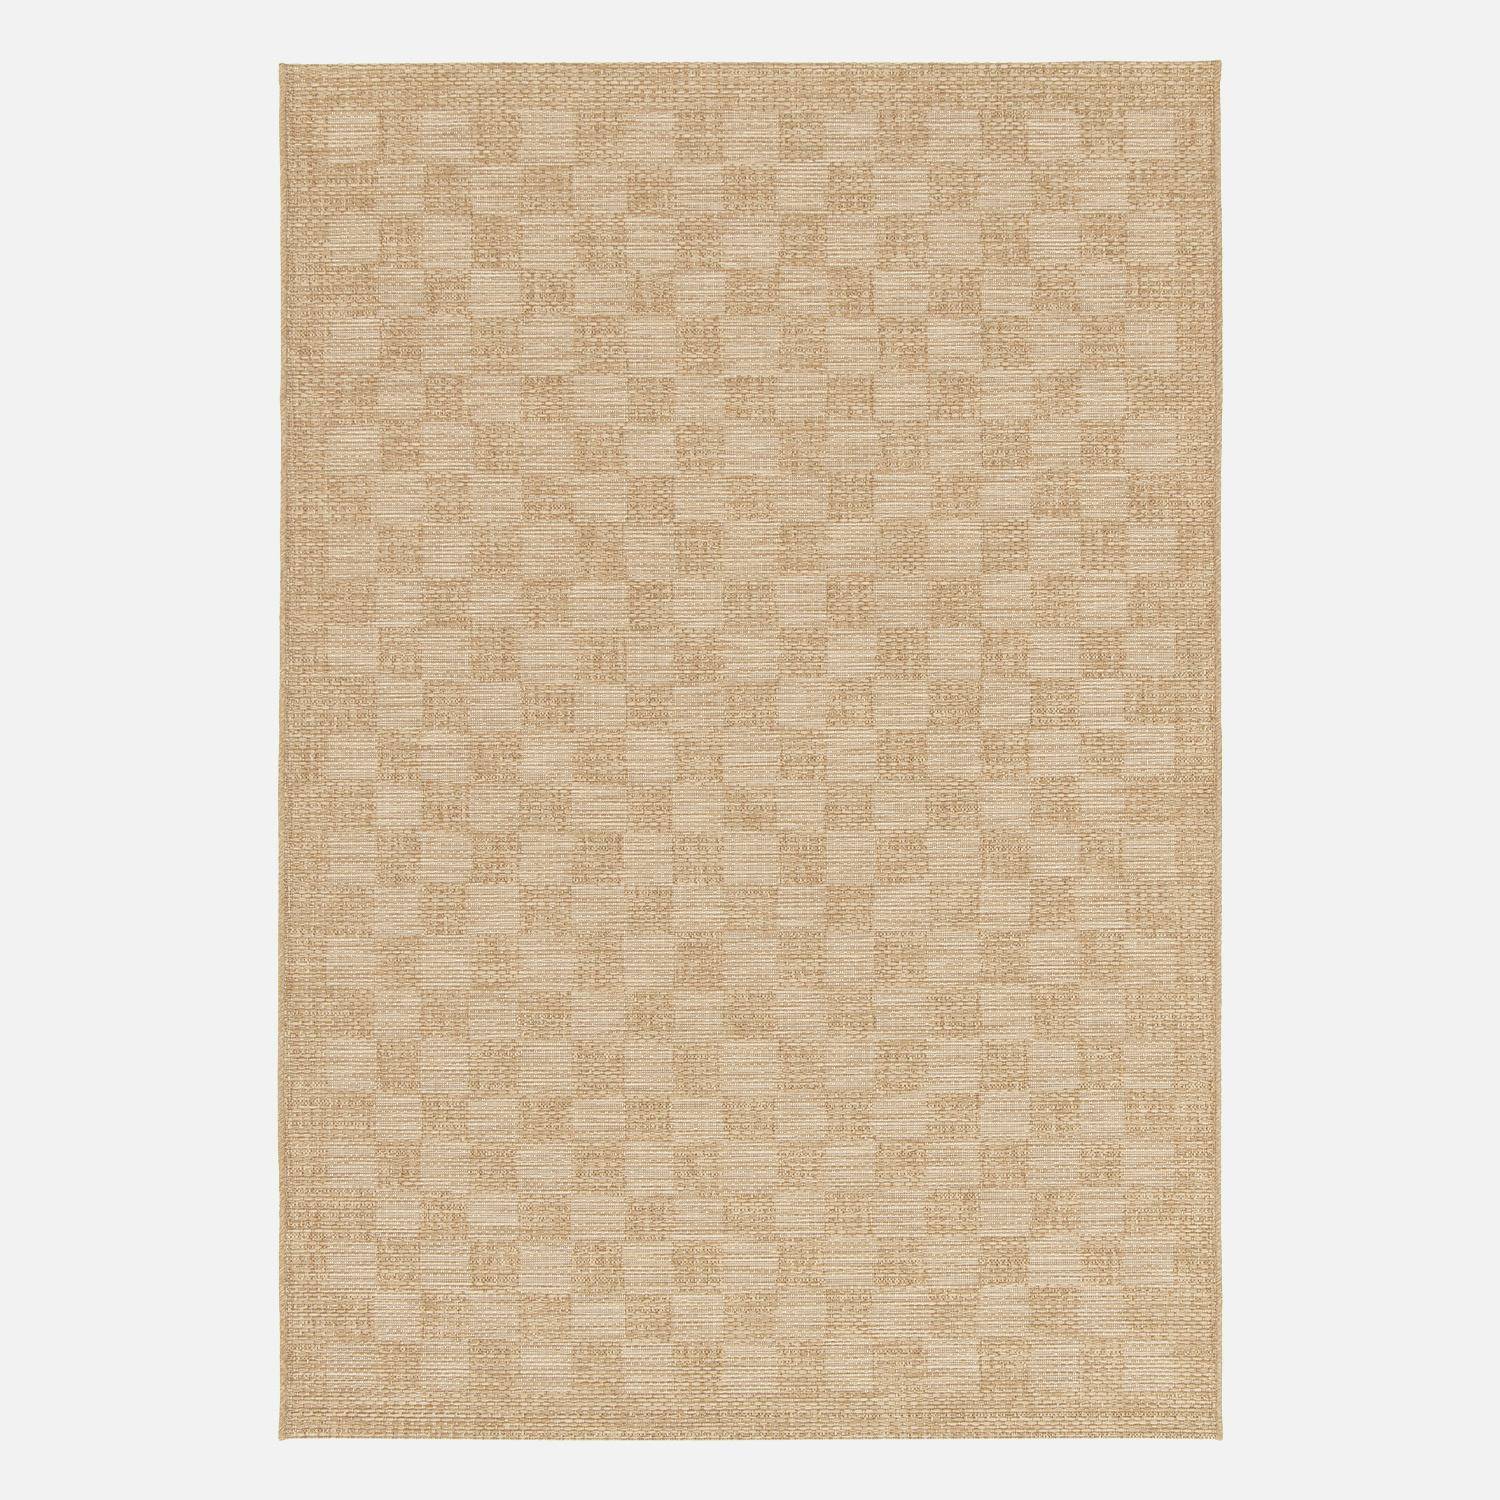 Jute-effect indoor/outdoor carpet with chequered pattern, Carrie, 120 x 170 cm Photo1